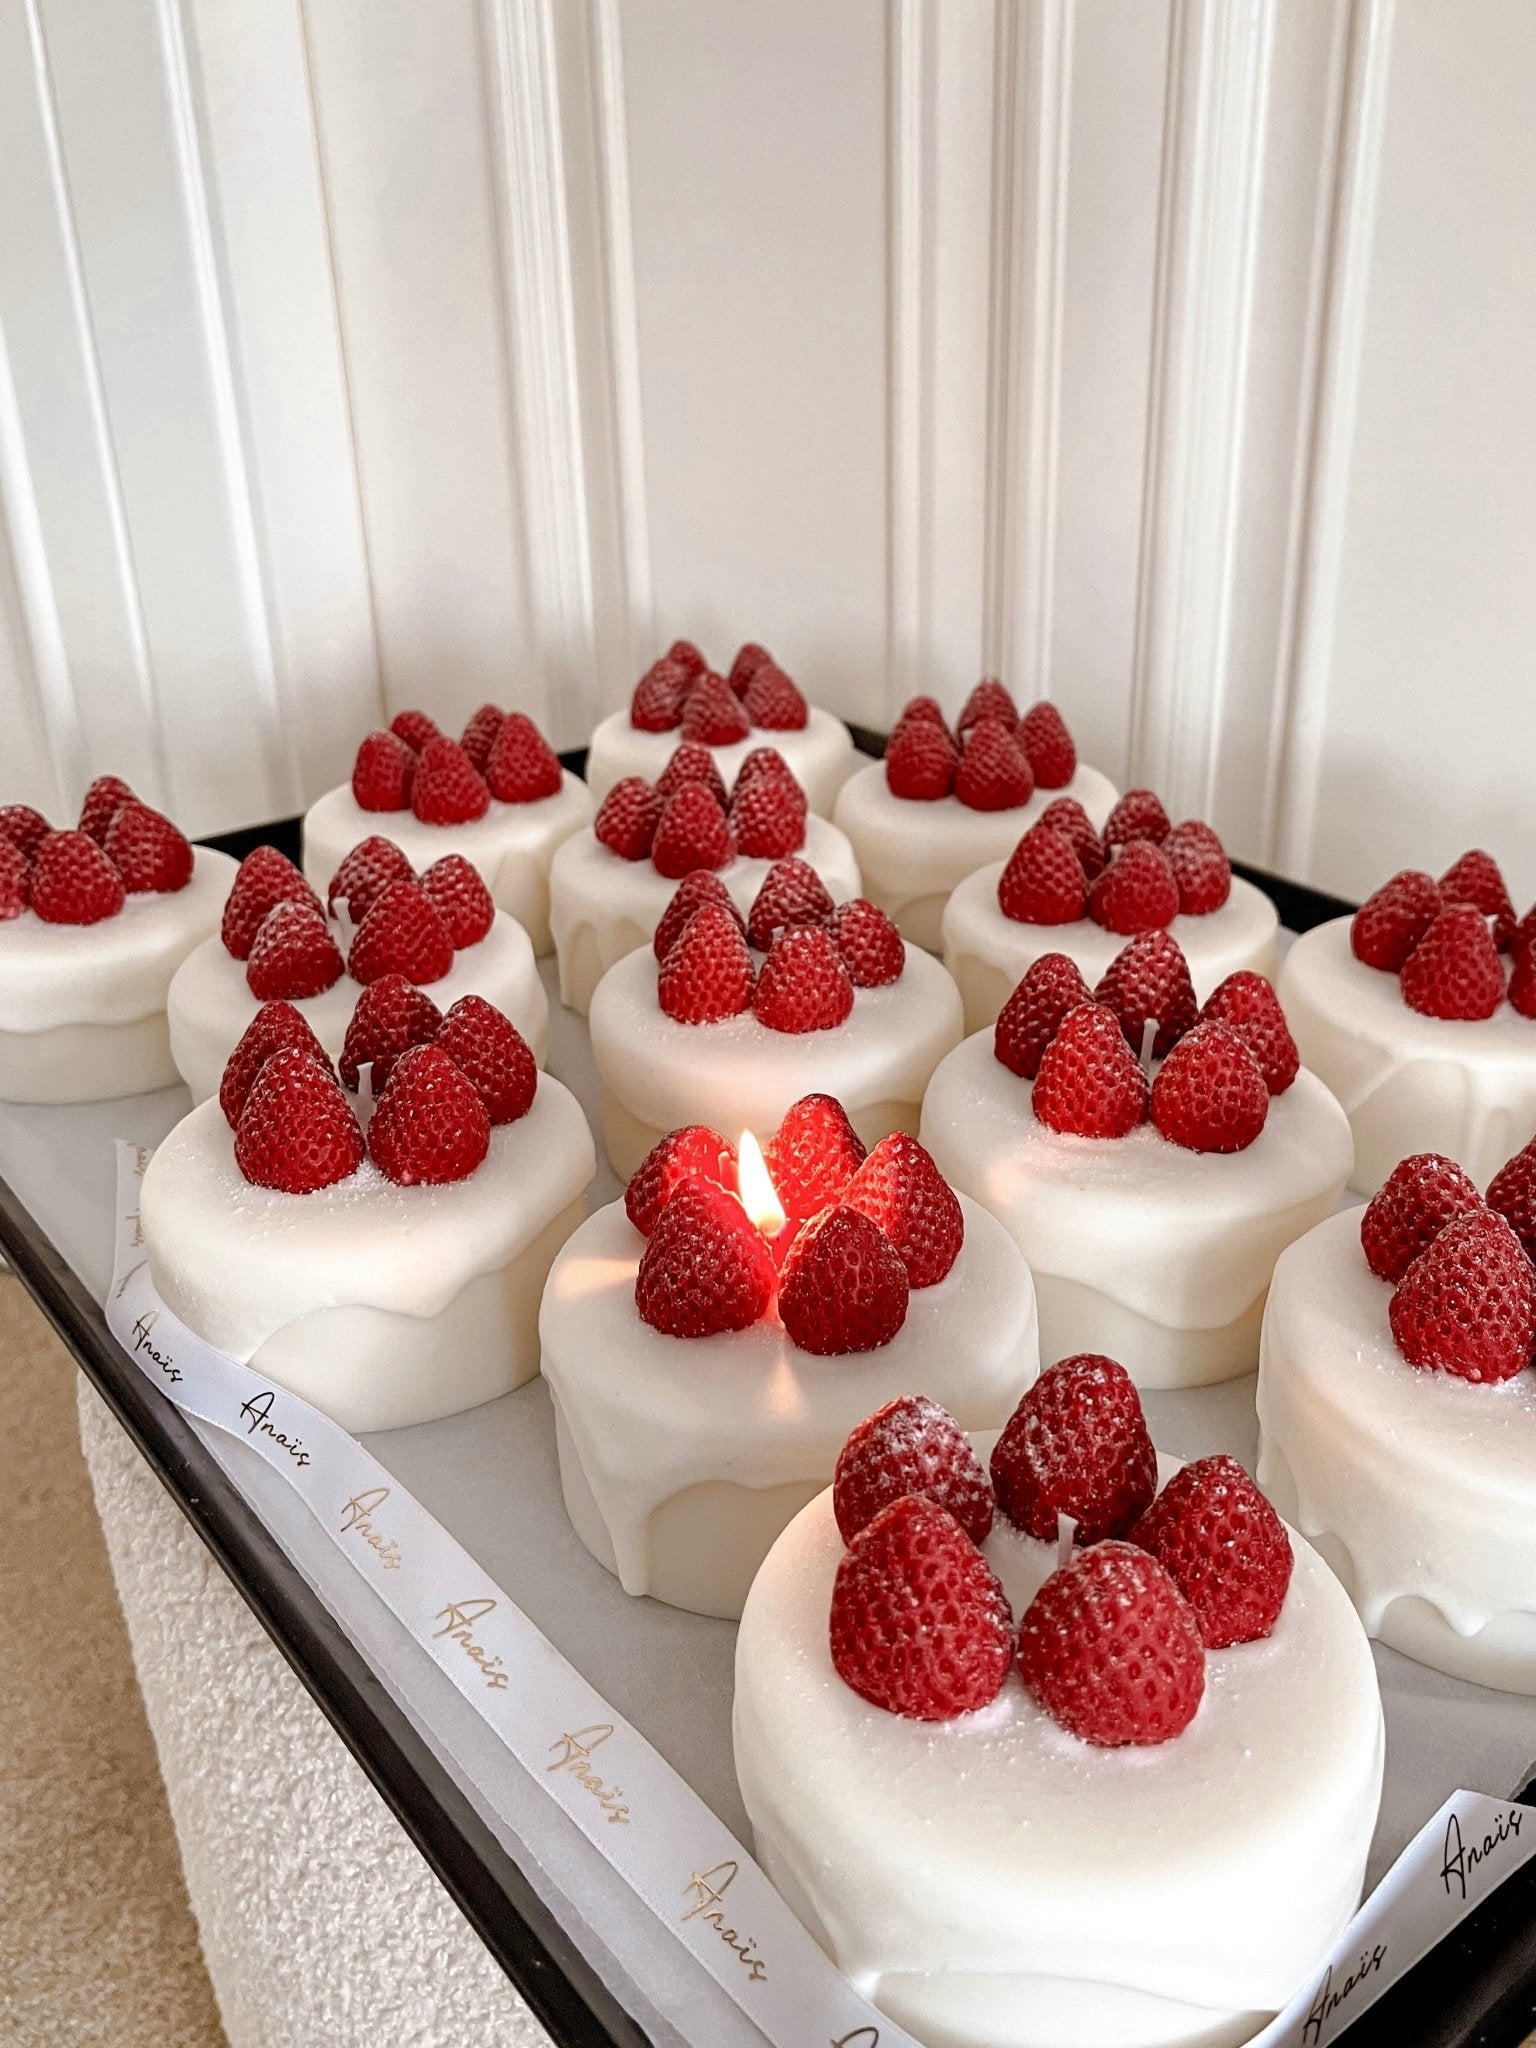 Best Strawberry Filling for Cupcakes | Unrivaled Candles